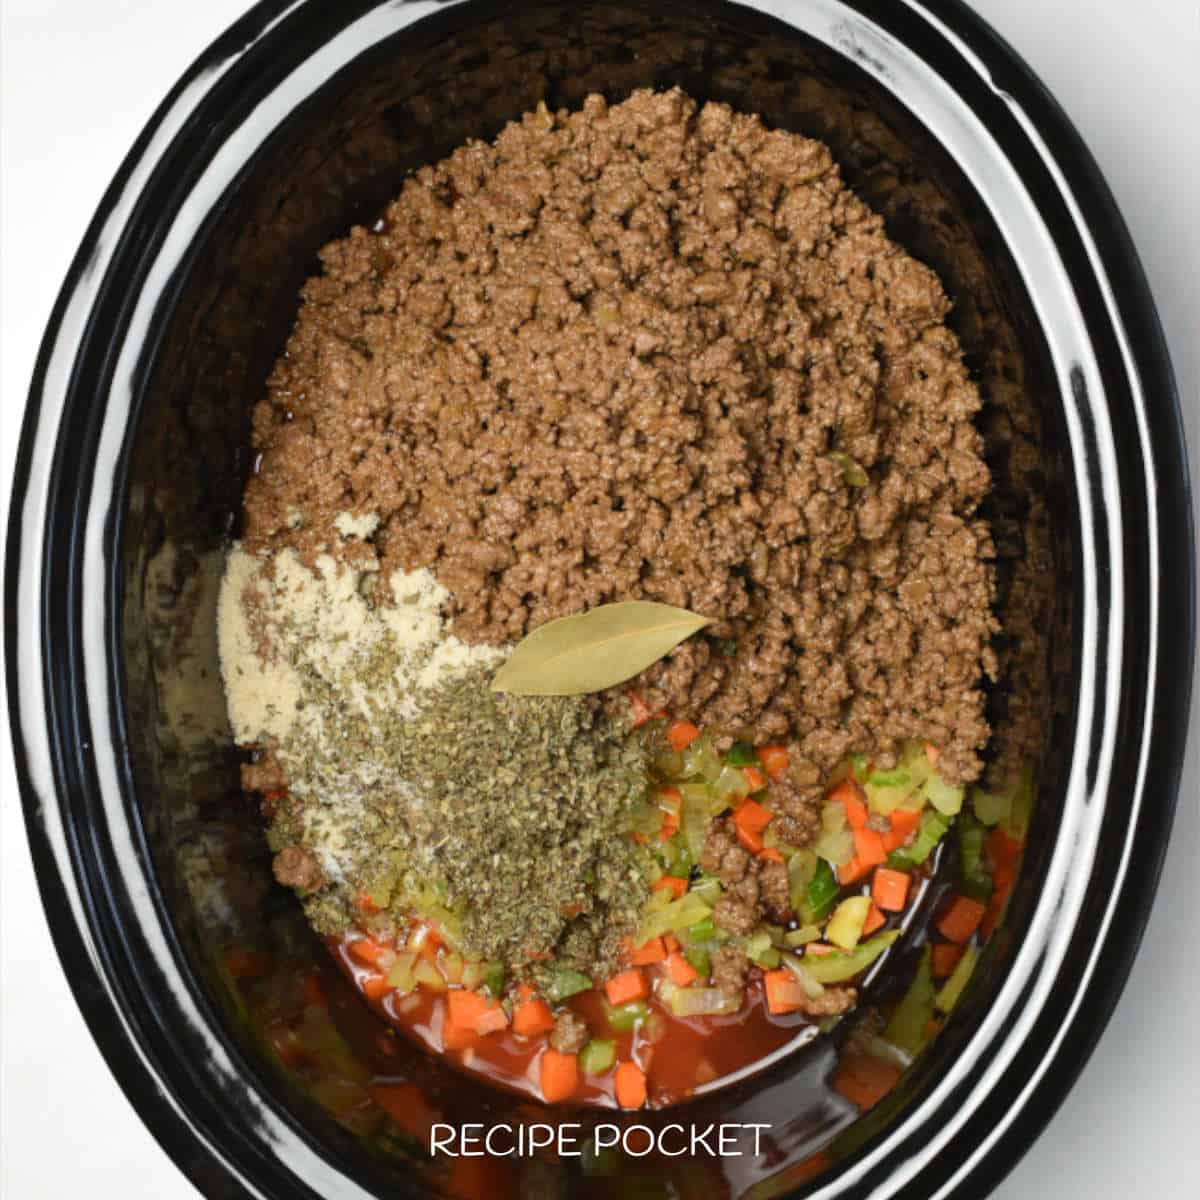 Bay leaf and dried herbs in a slow cooker with ground beef and vegetables.